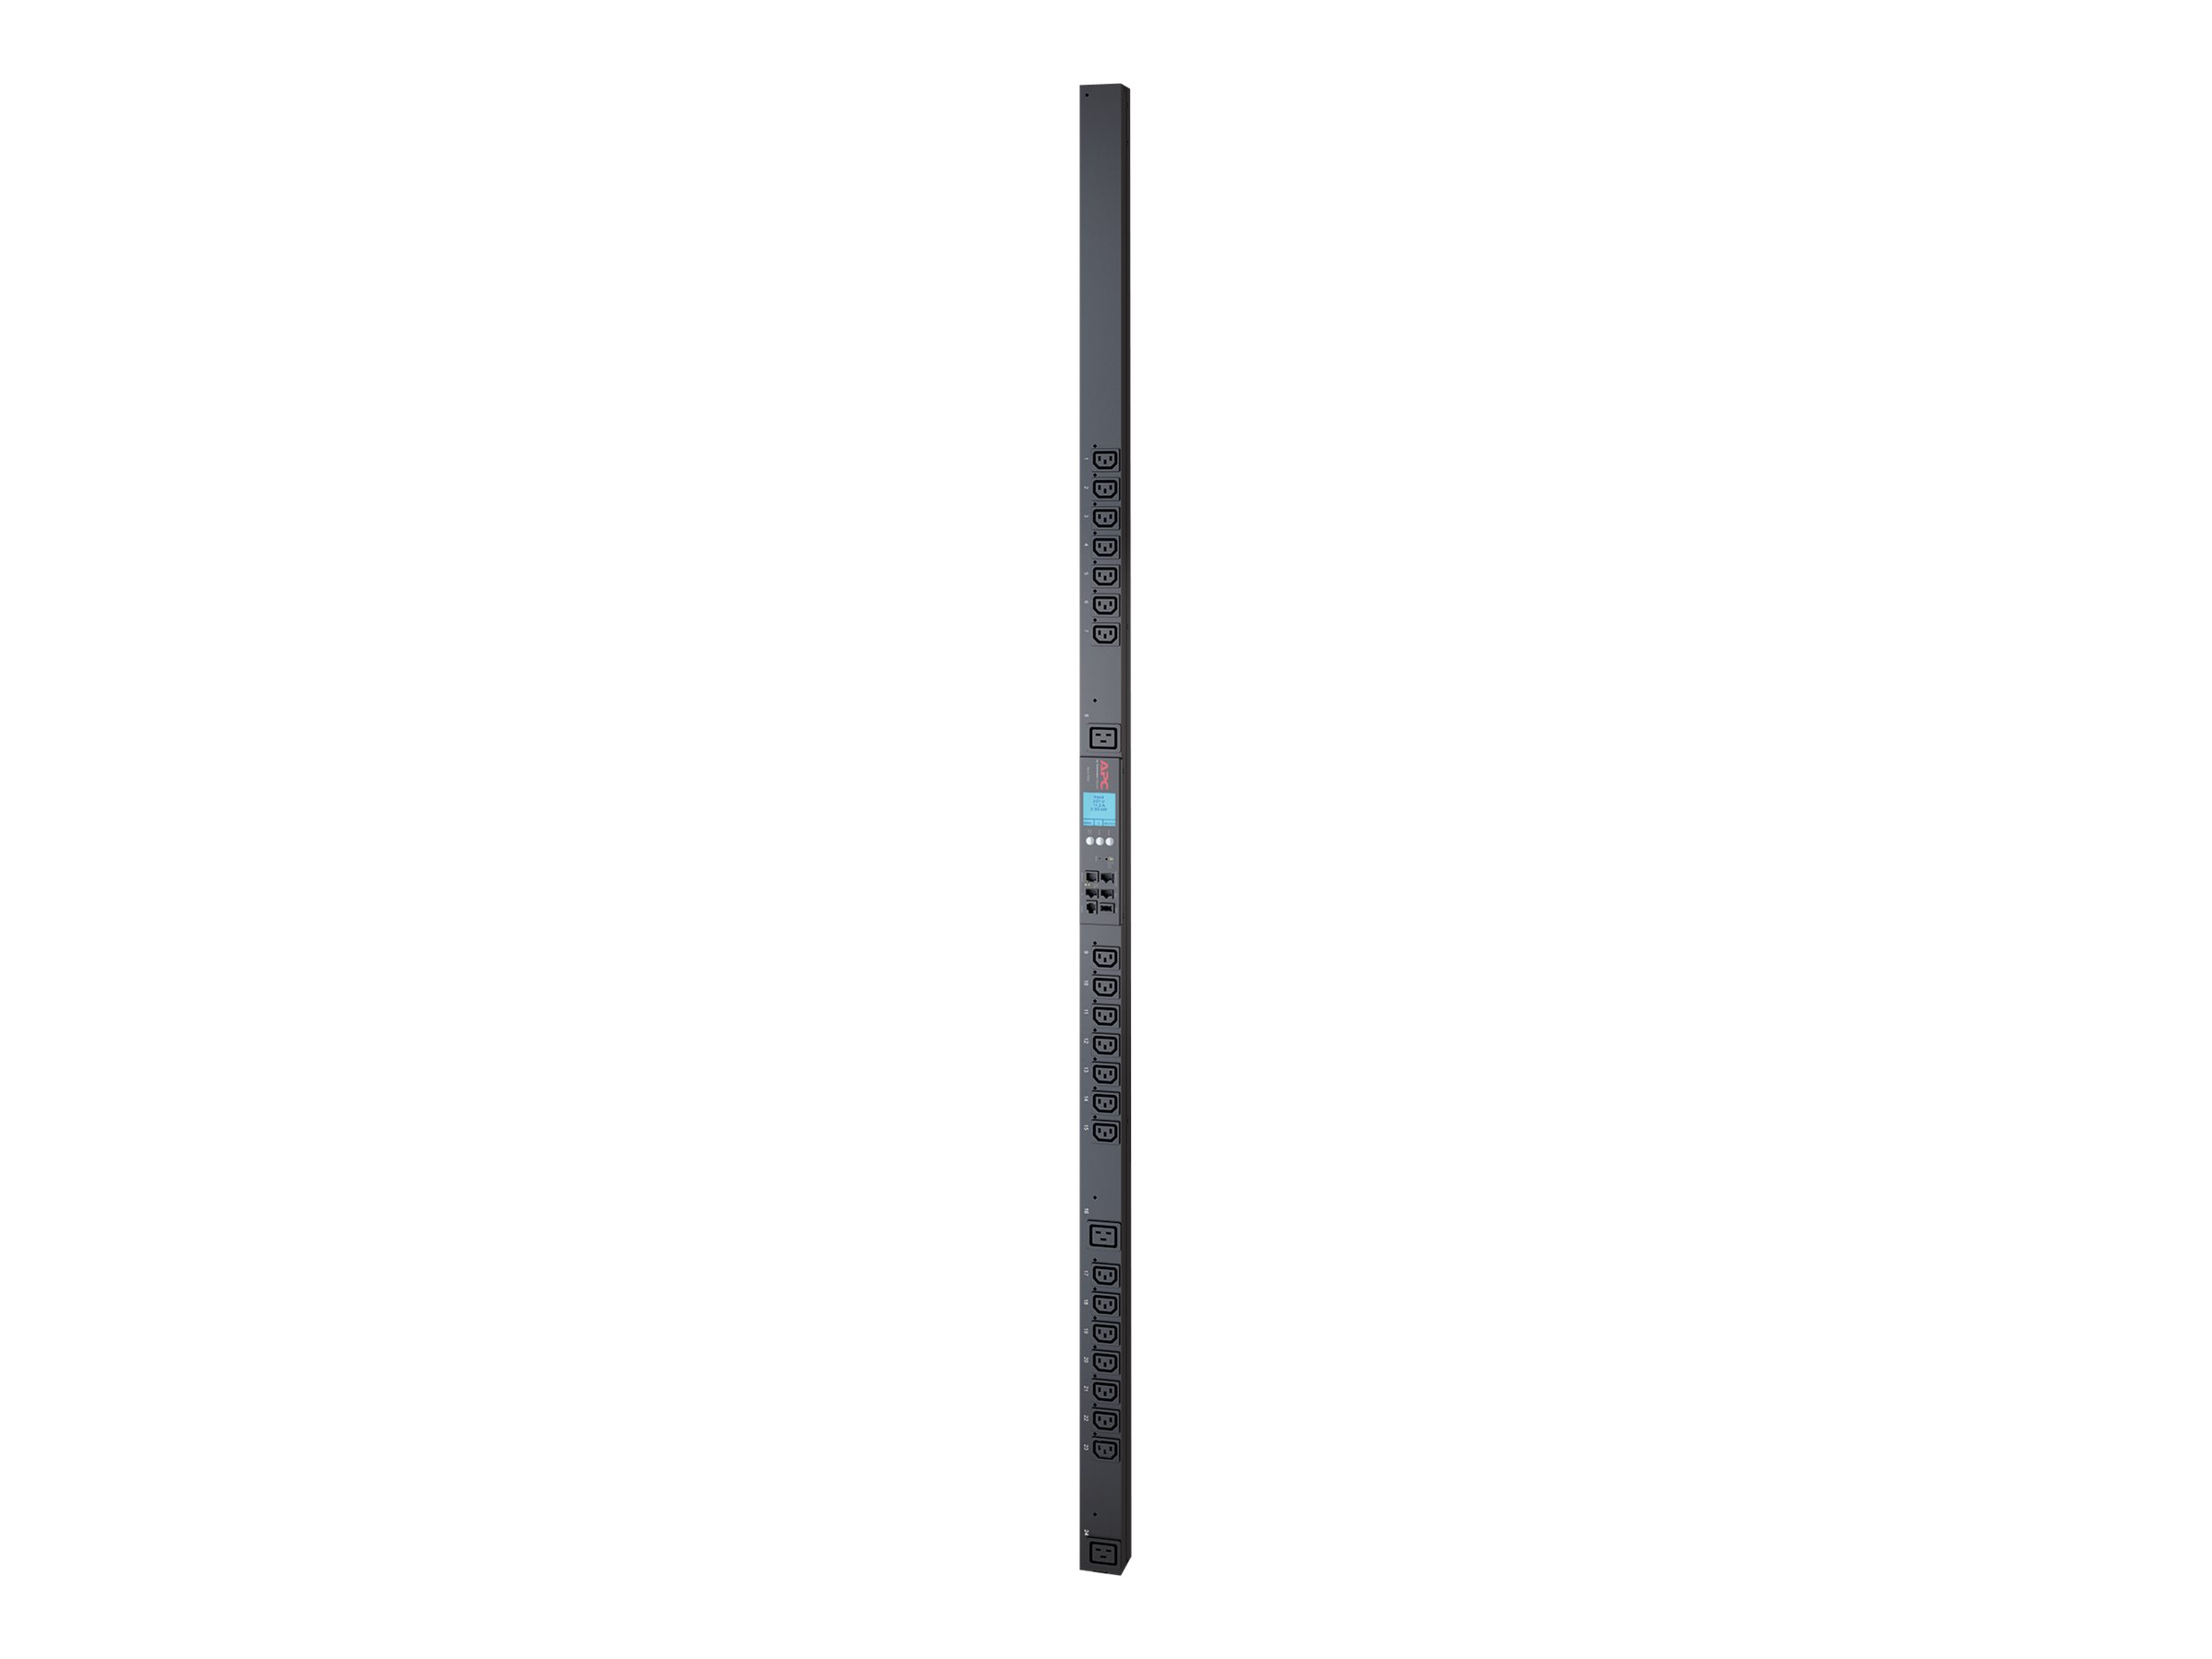 PDU / Rack PDU 2G, Metered by Outlet with Switching, ZeroU, 20A/208V, 16A/230V, (21) C13 & (3) C19